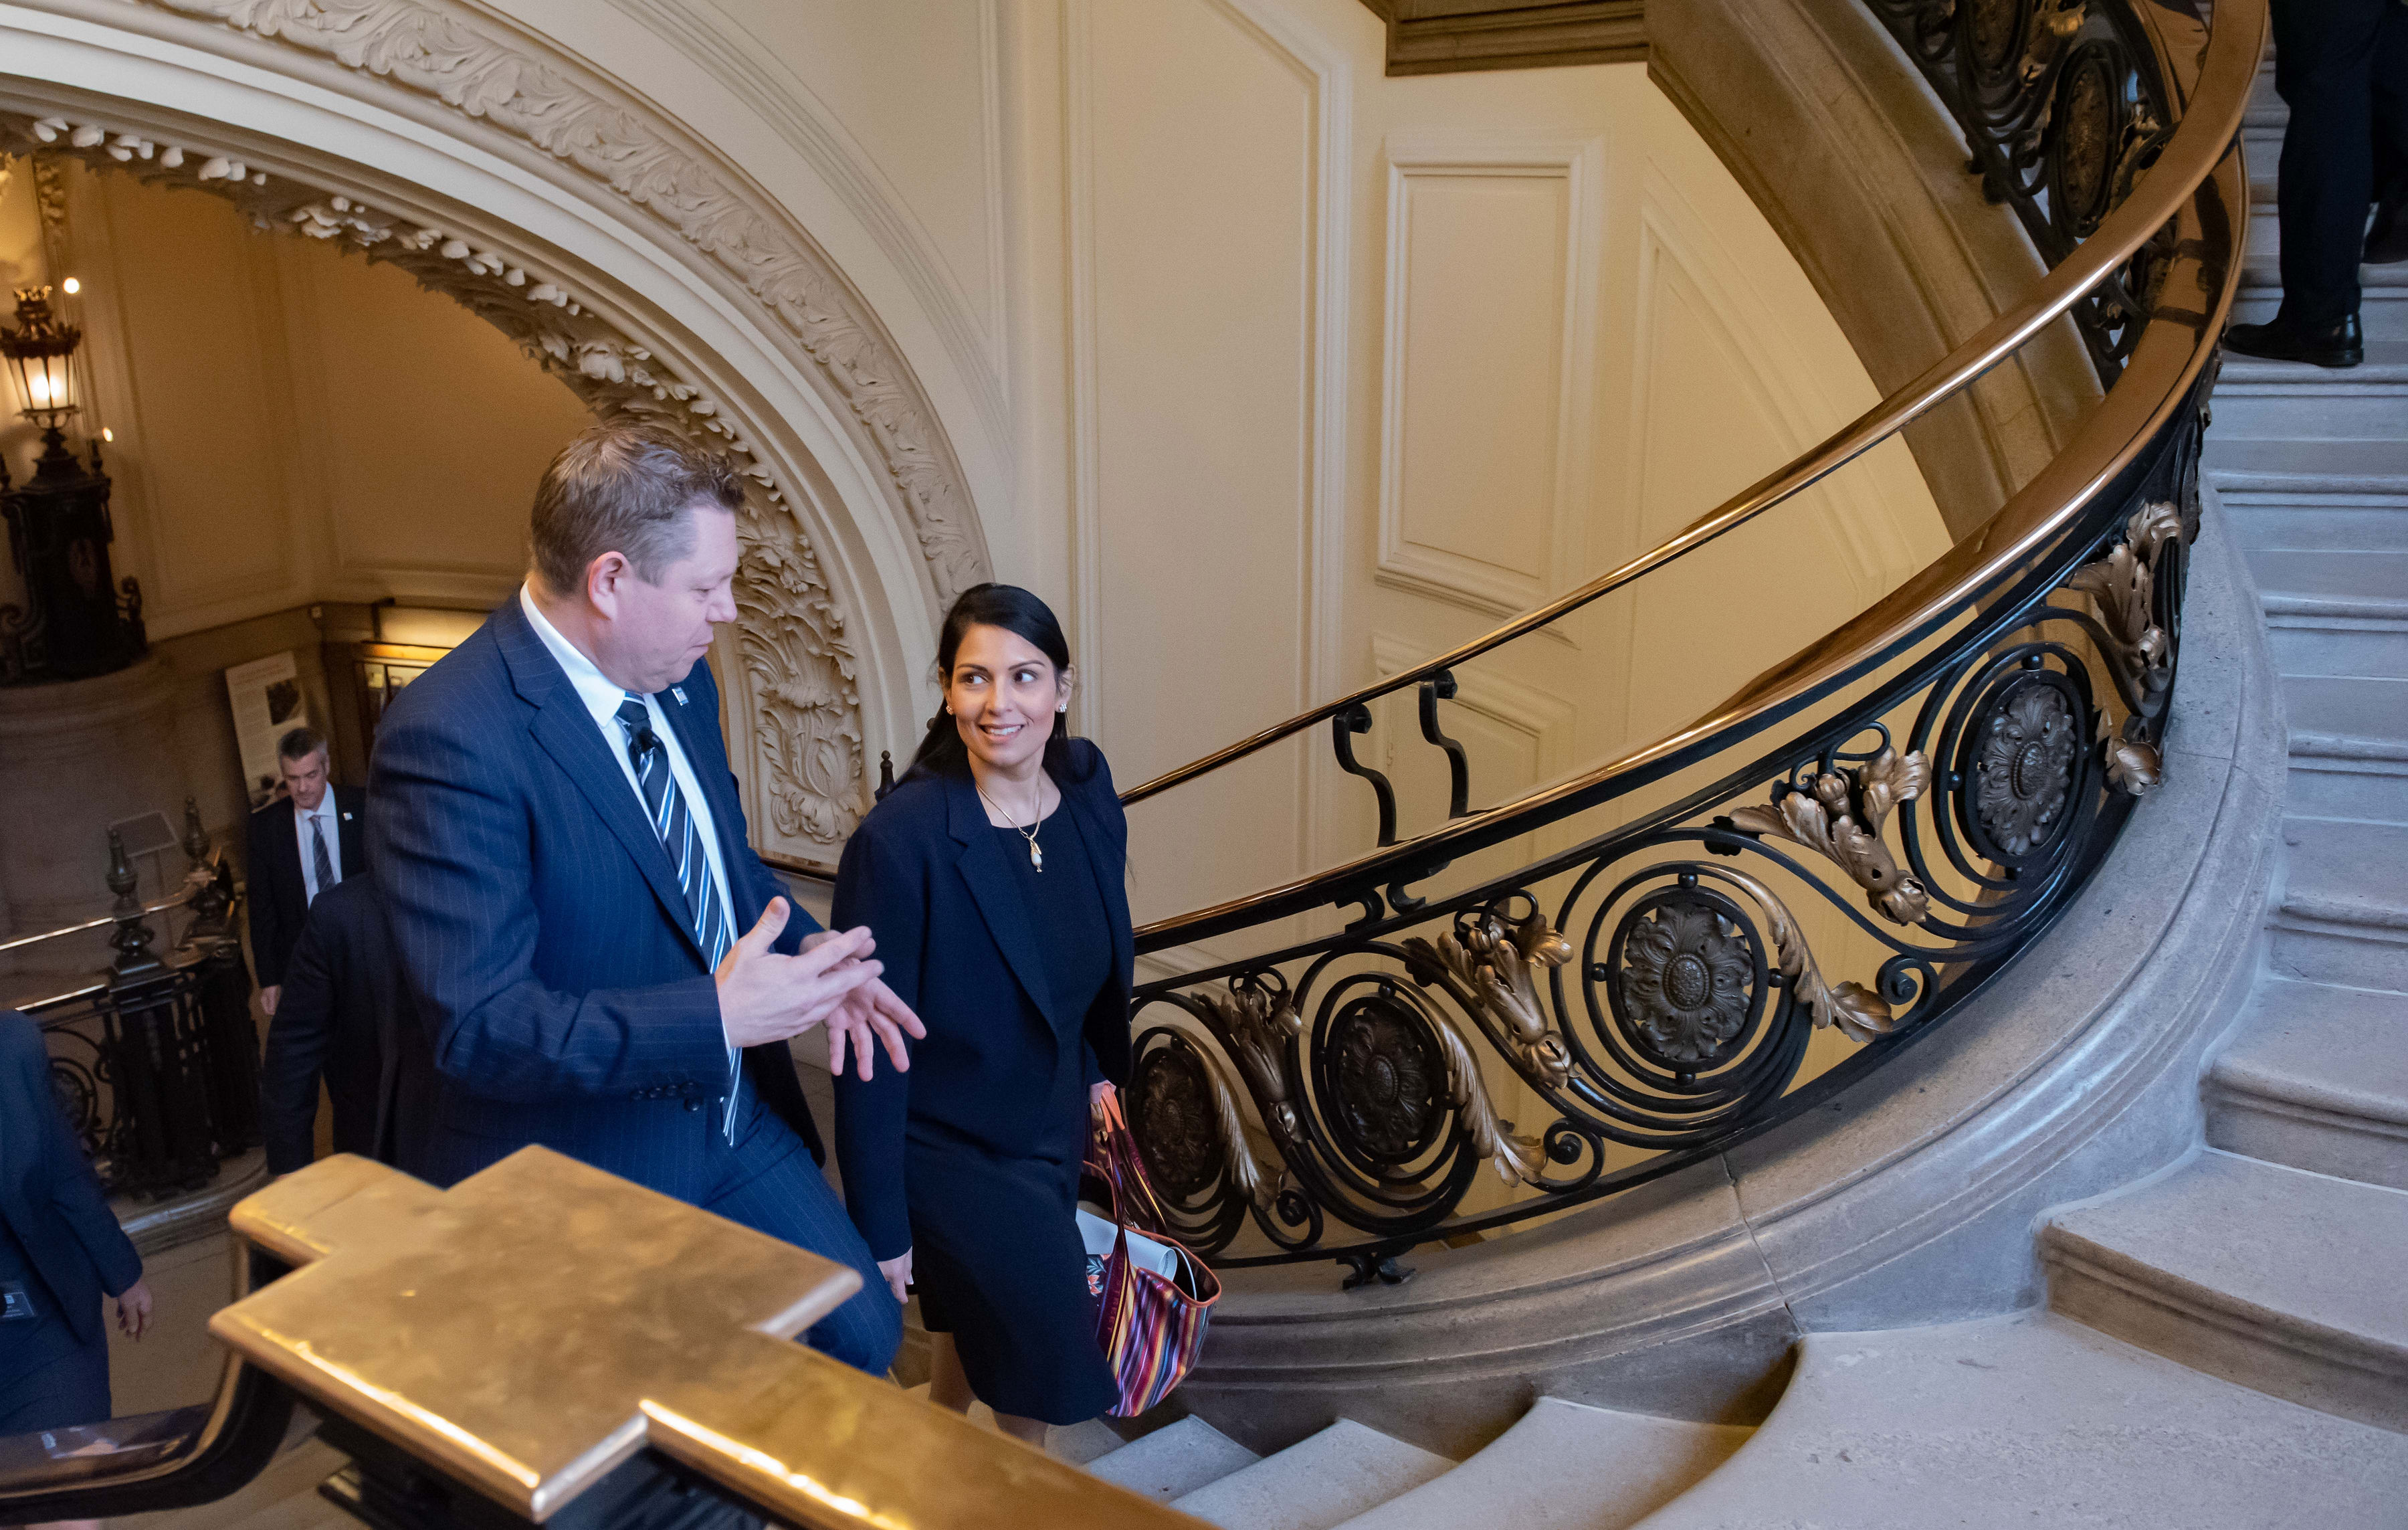 Priti Patel, pictured here with John Apter, was appointed Home Secretary in August